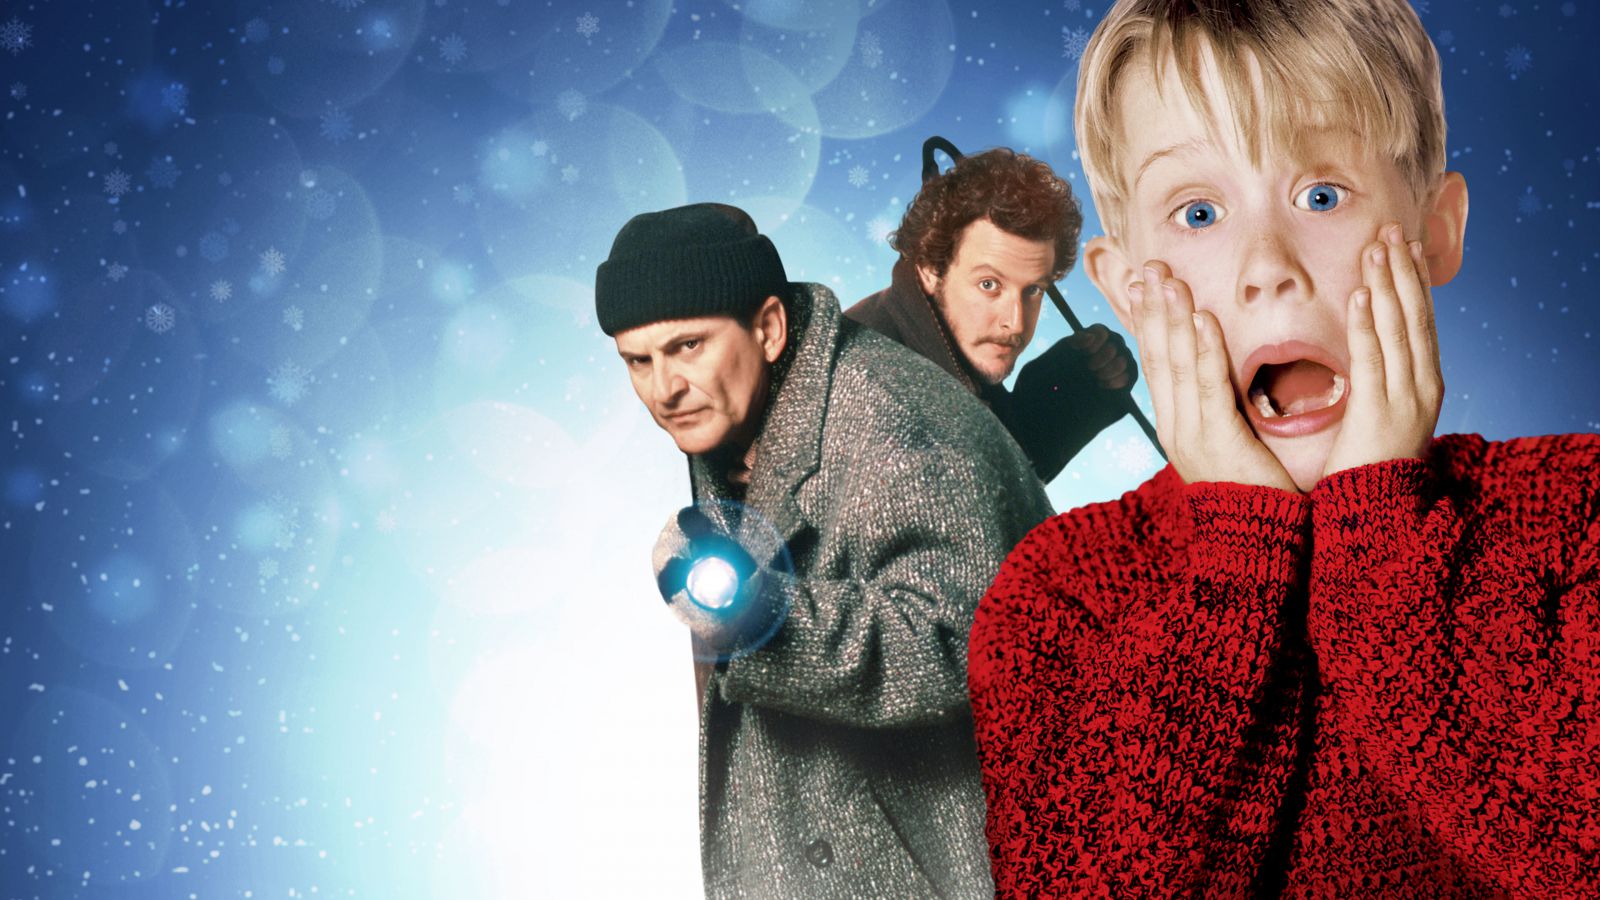 Watch Movie Home Alone (1990) Full HD Full Movie Free Online